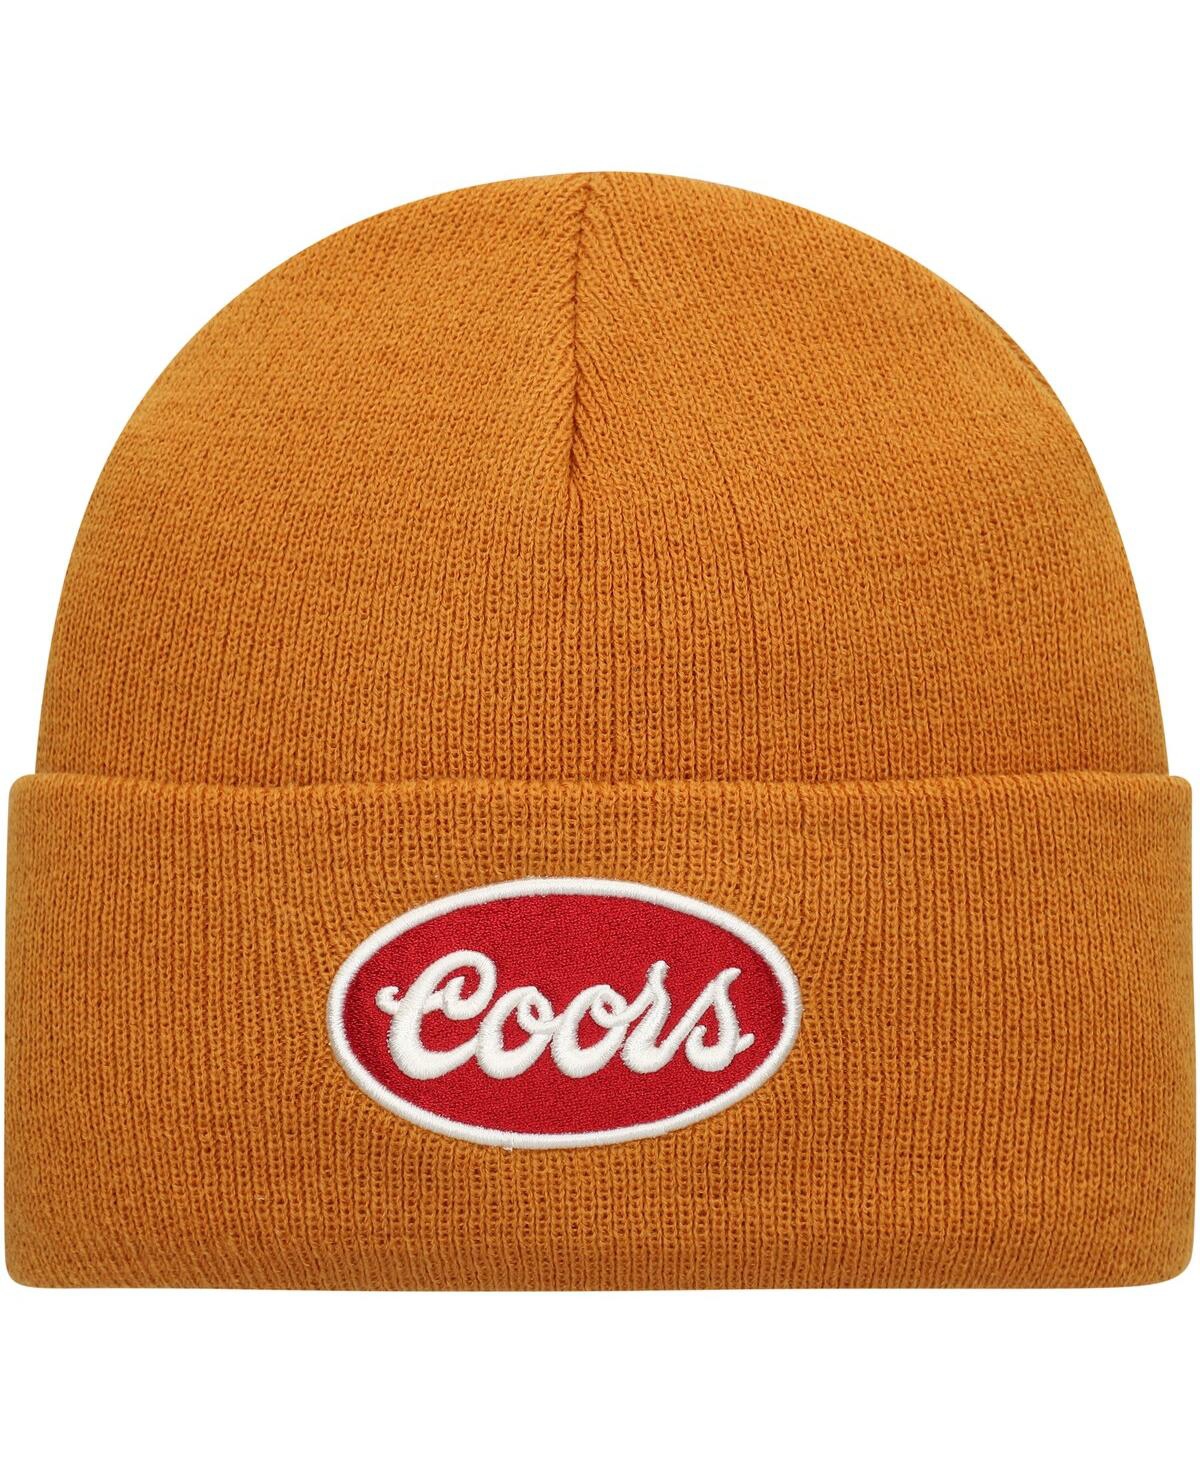 American Needle Men's  Brown Coors Cuffed Knit Hat